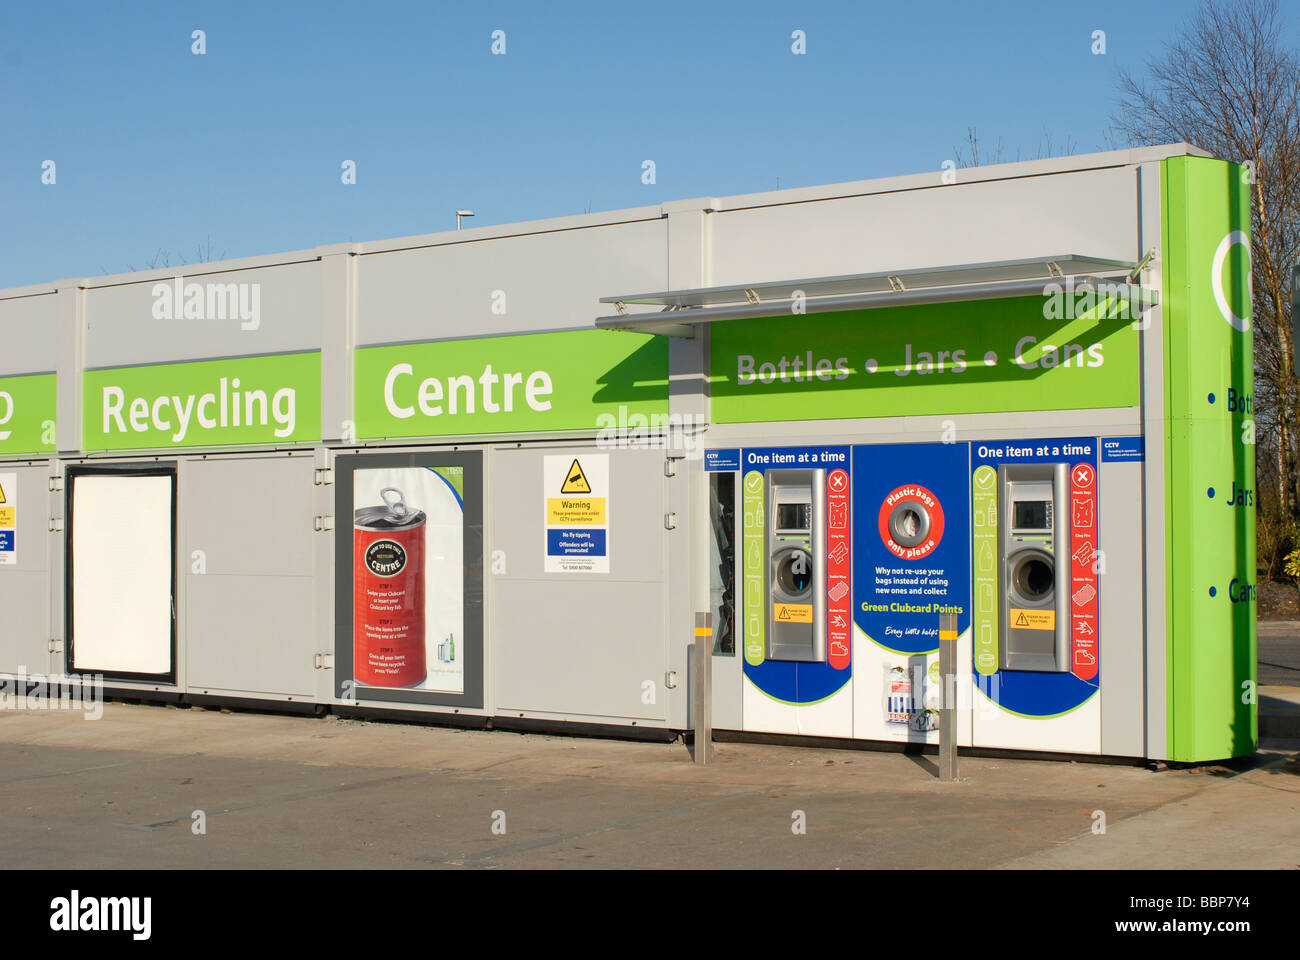 Recycling centre outside a Tesco supermarket in England. Stock Photo